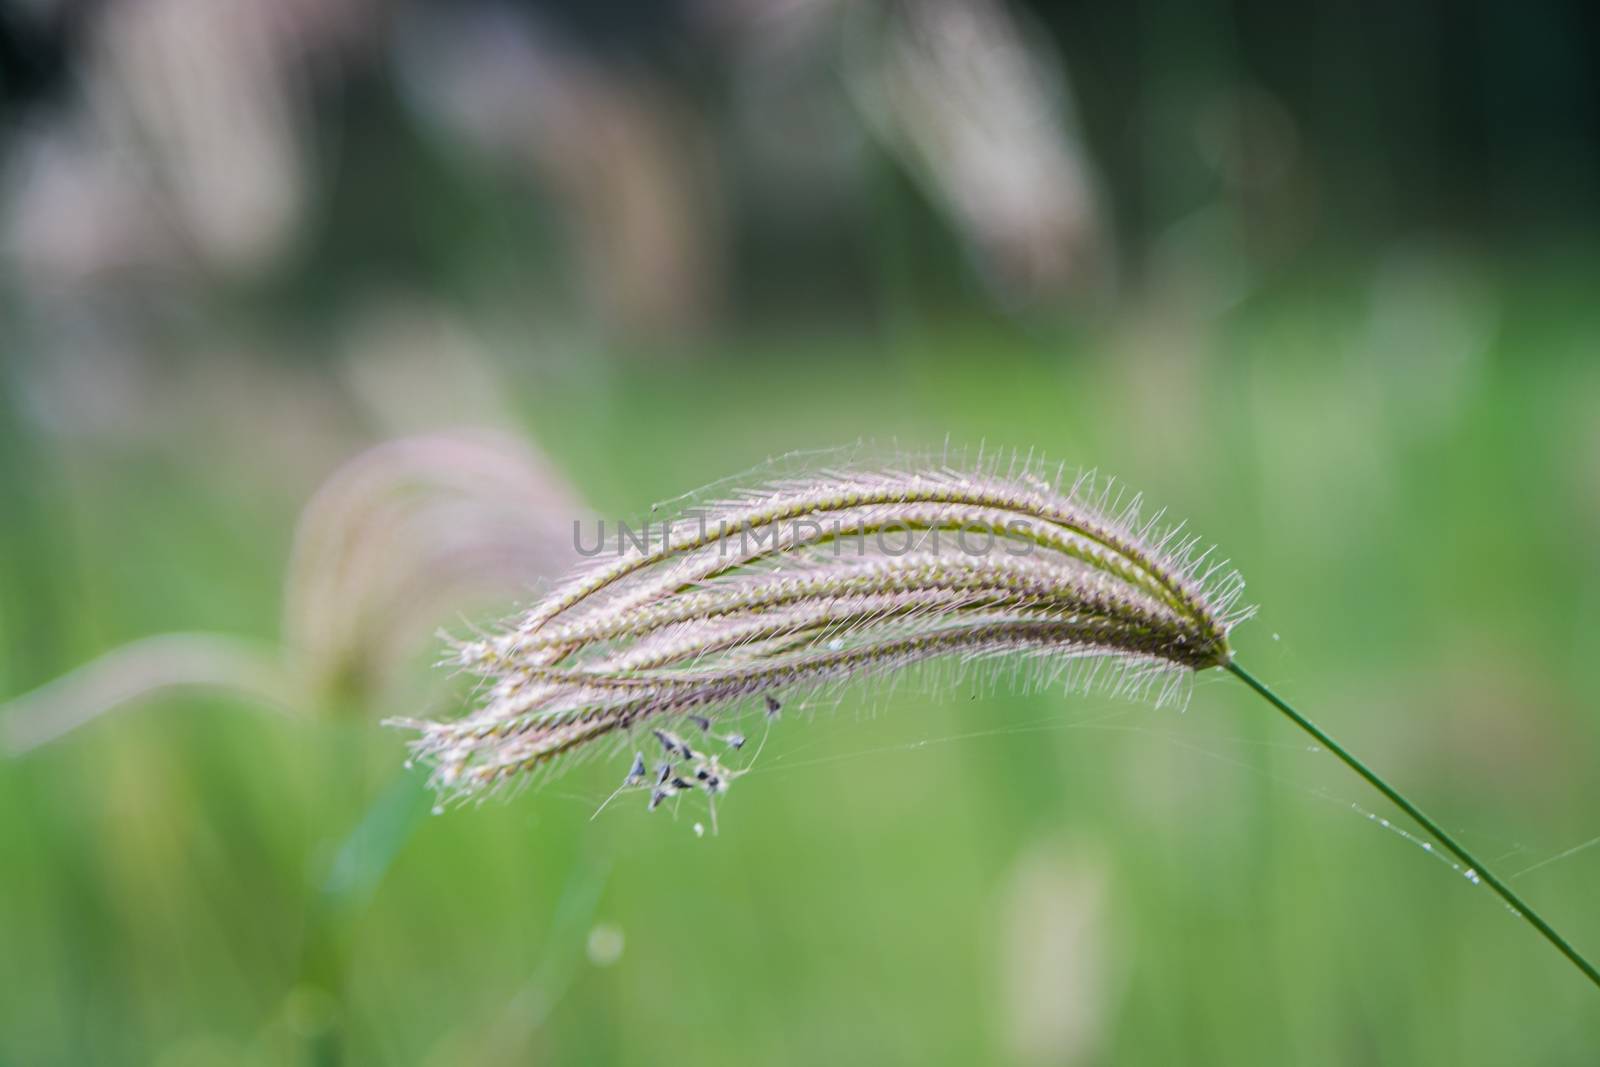 The Select focus of grass flower with blur background